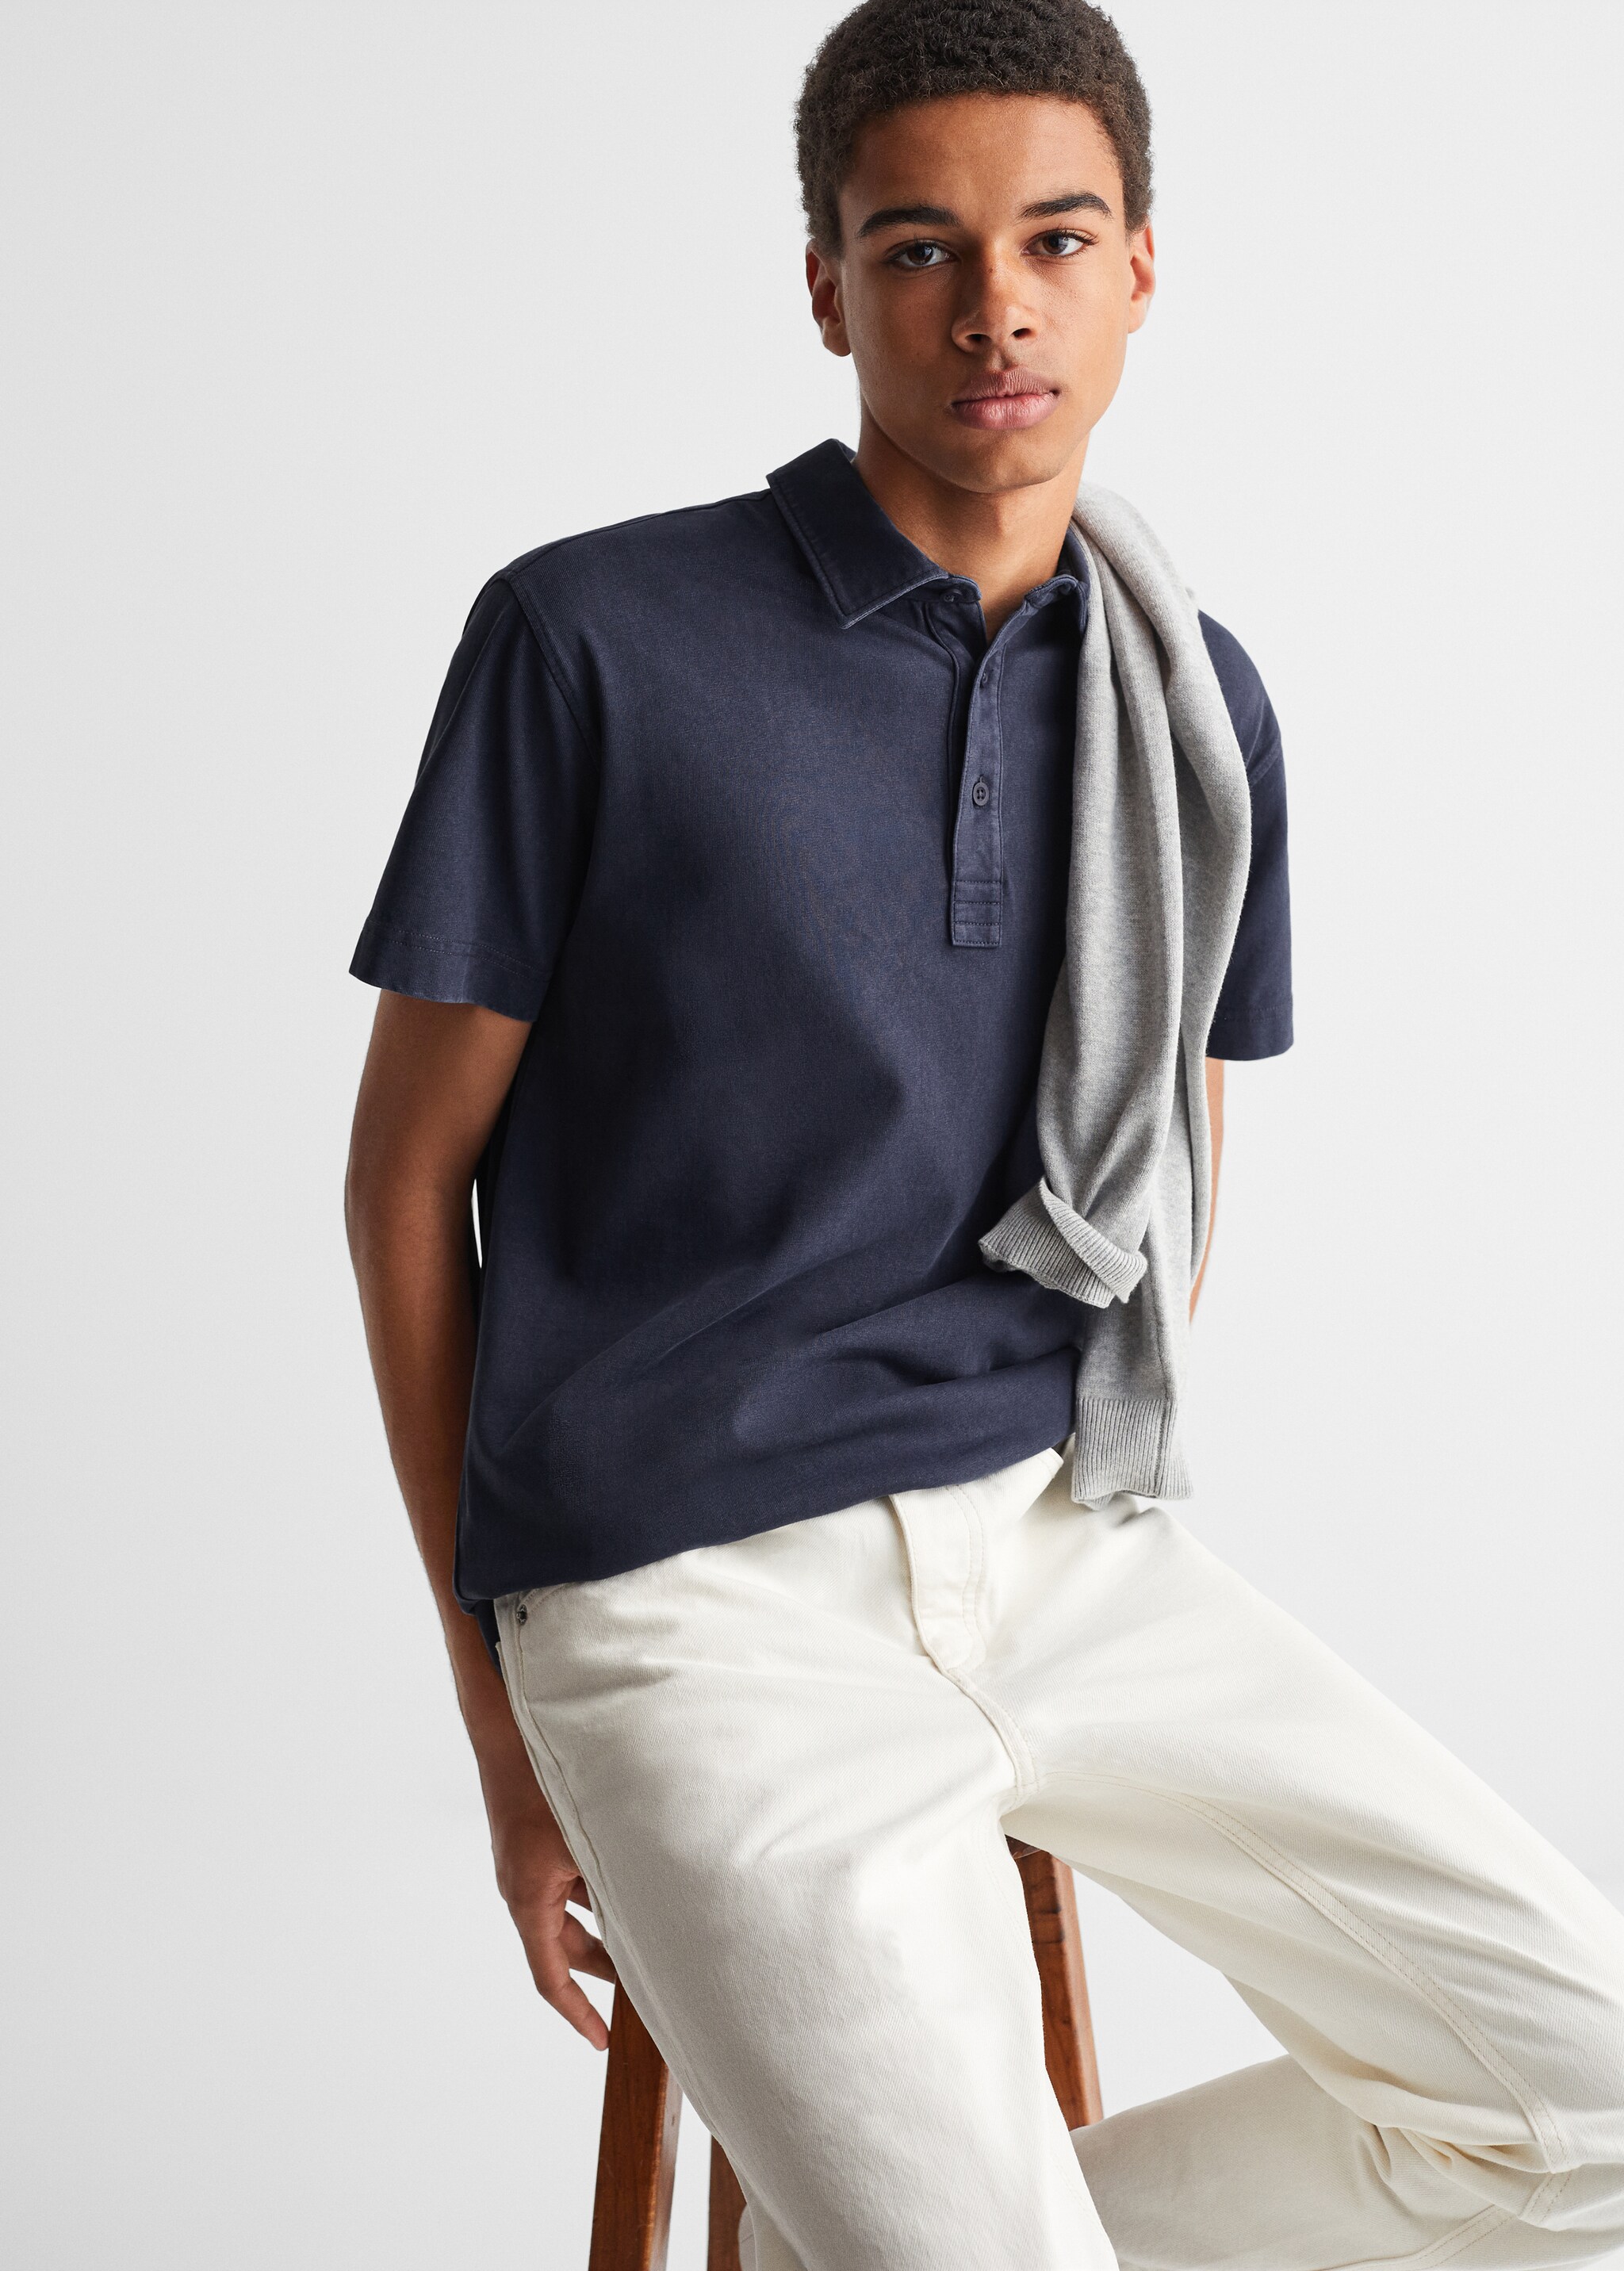 100% cotton polo shirt - Details of the article 2